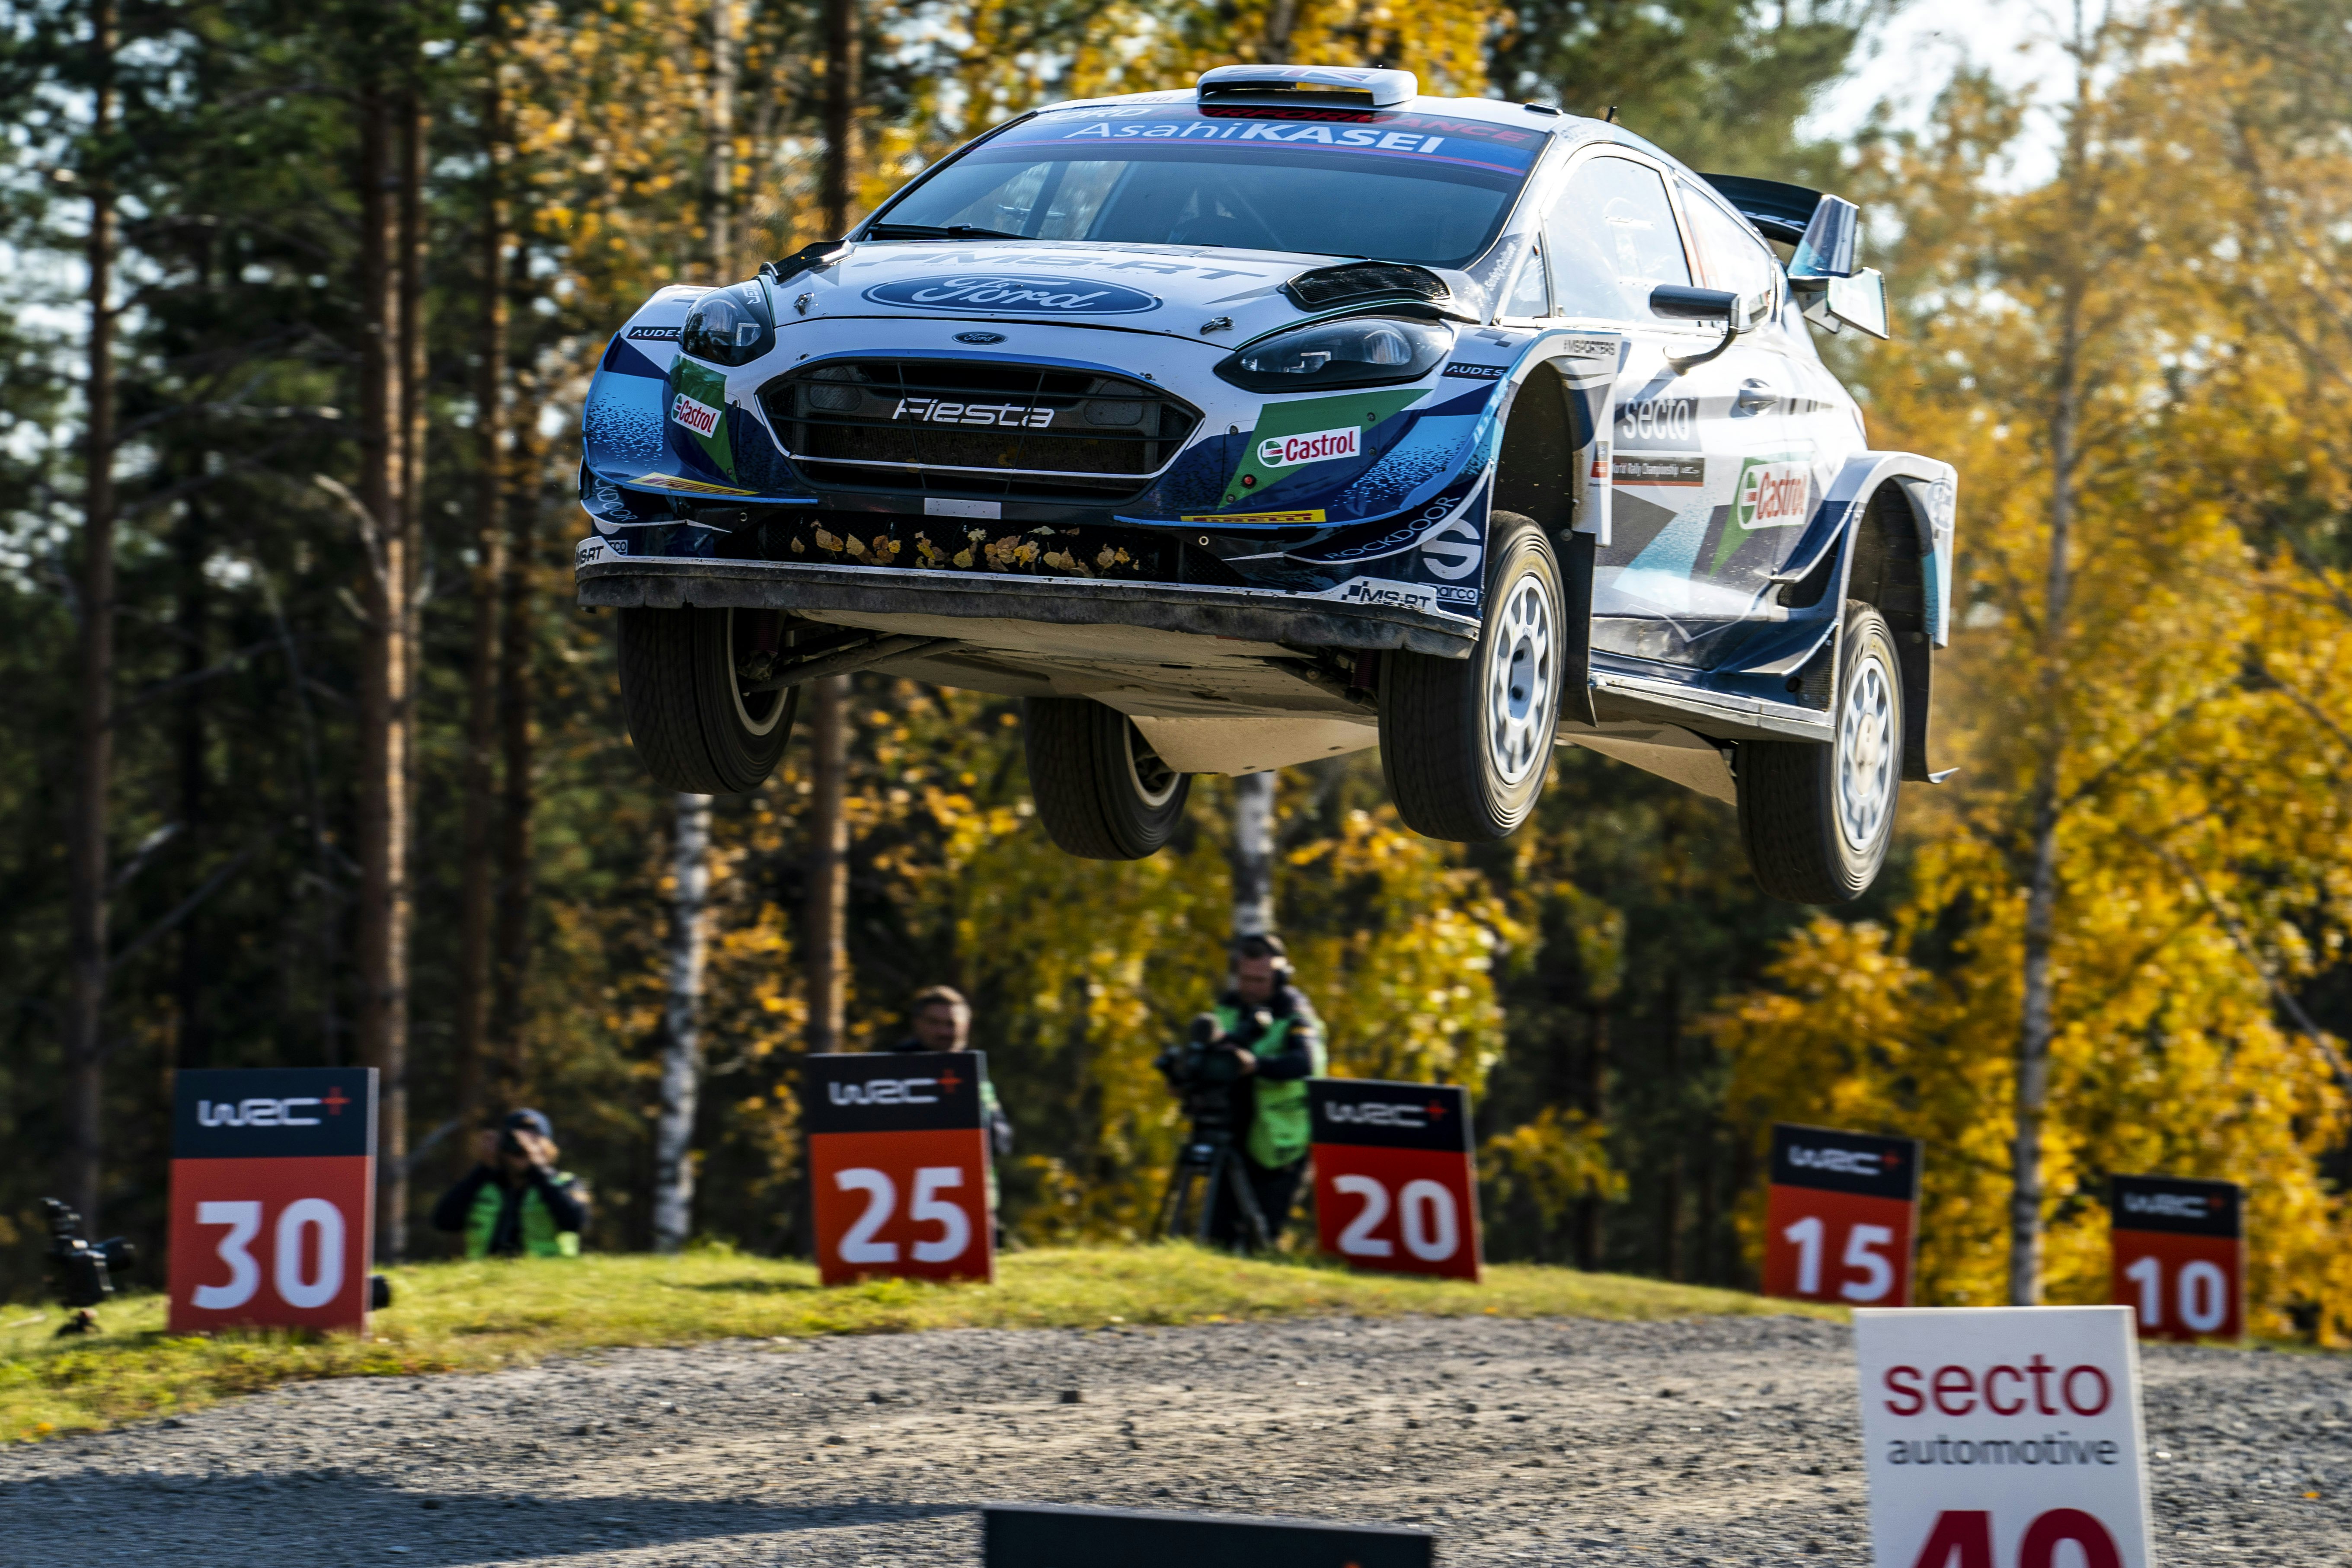 Ford Fiesta RS WRC (2010): the Blue Oval's new World Rally Car